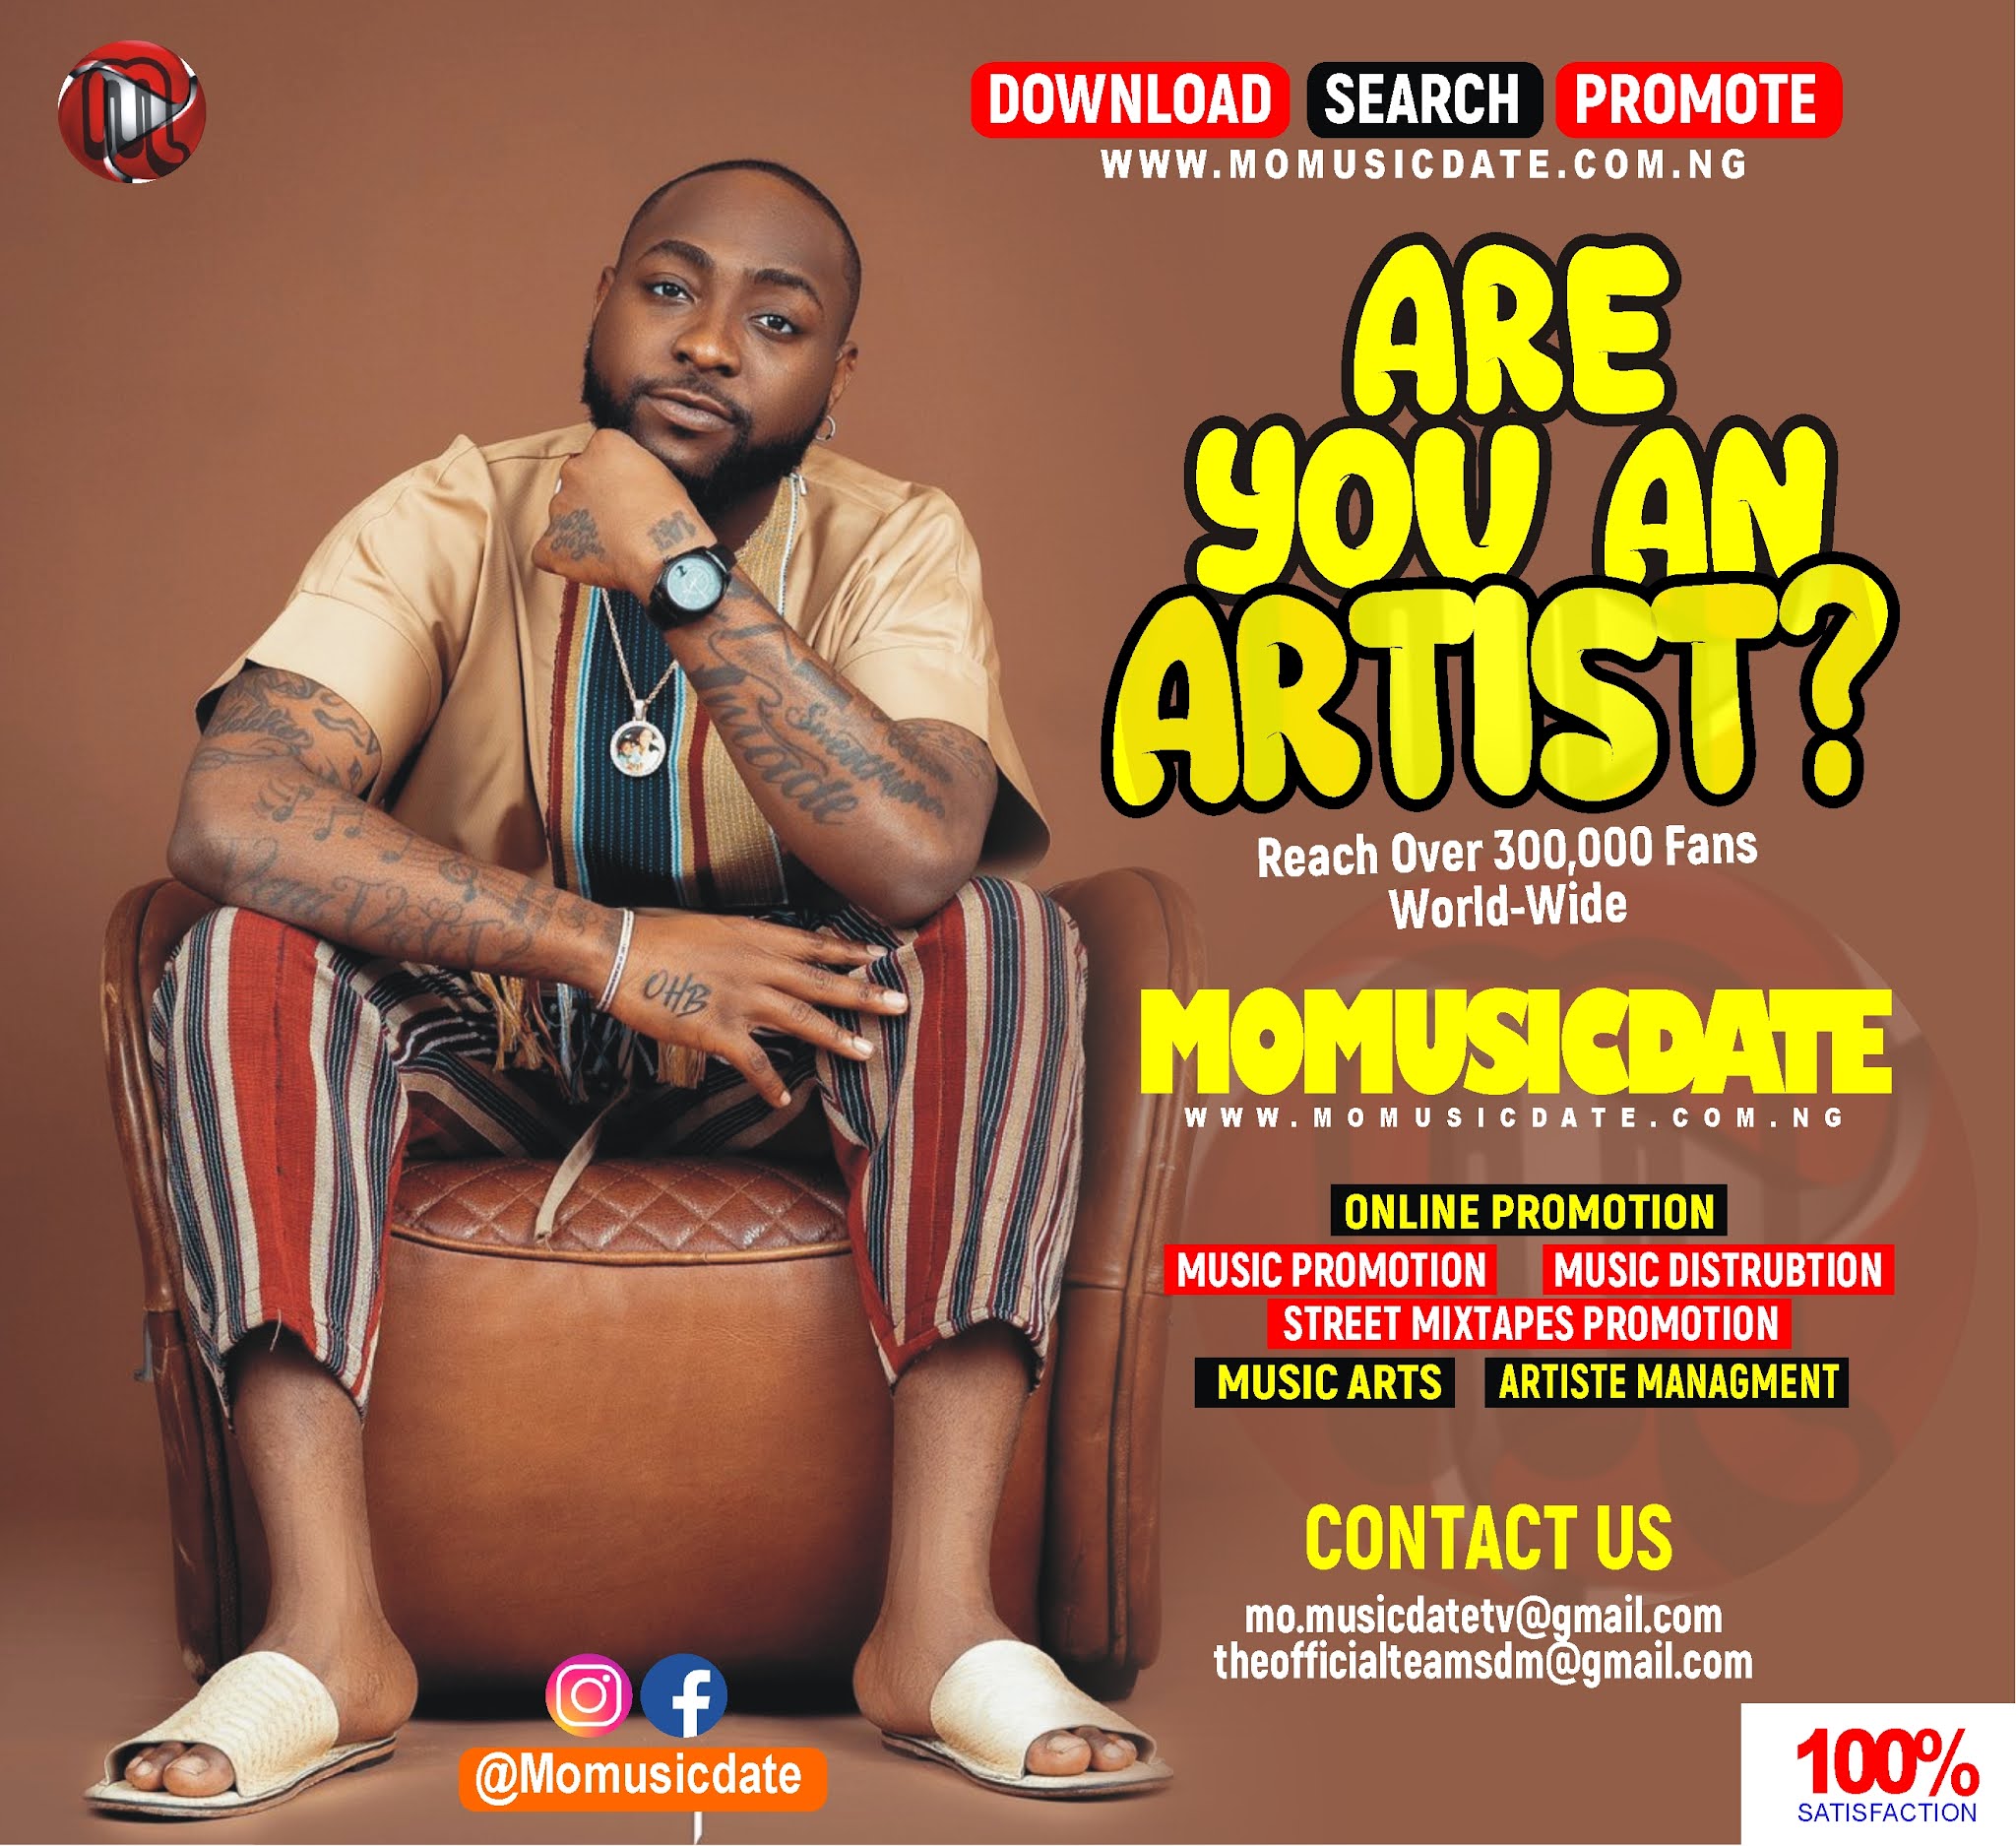 "Davido Promotions for artist"